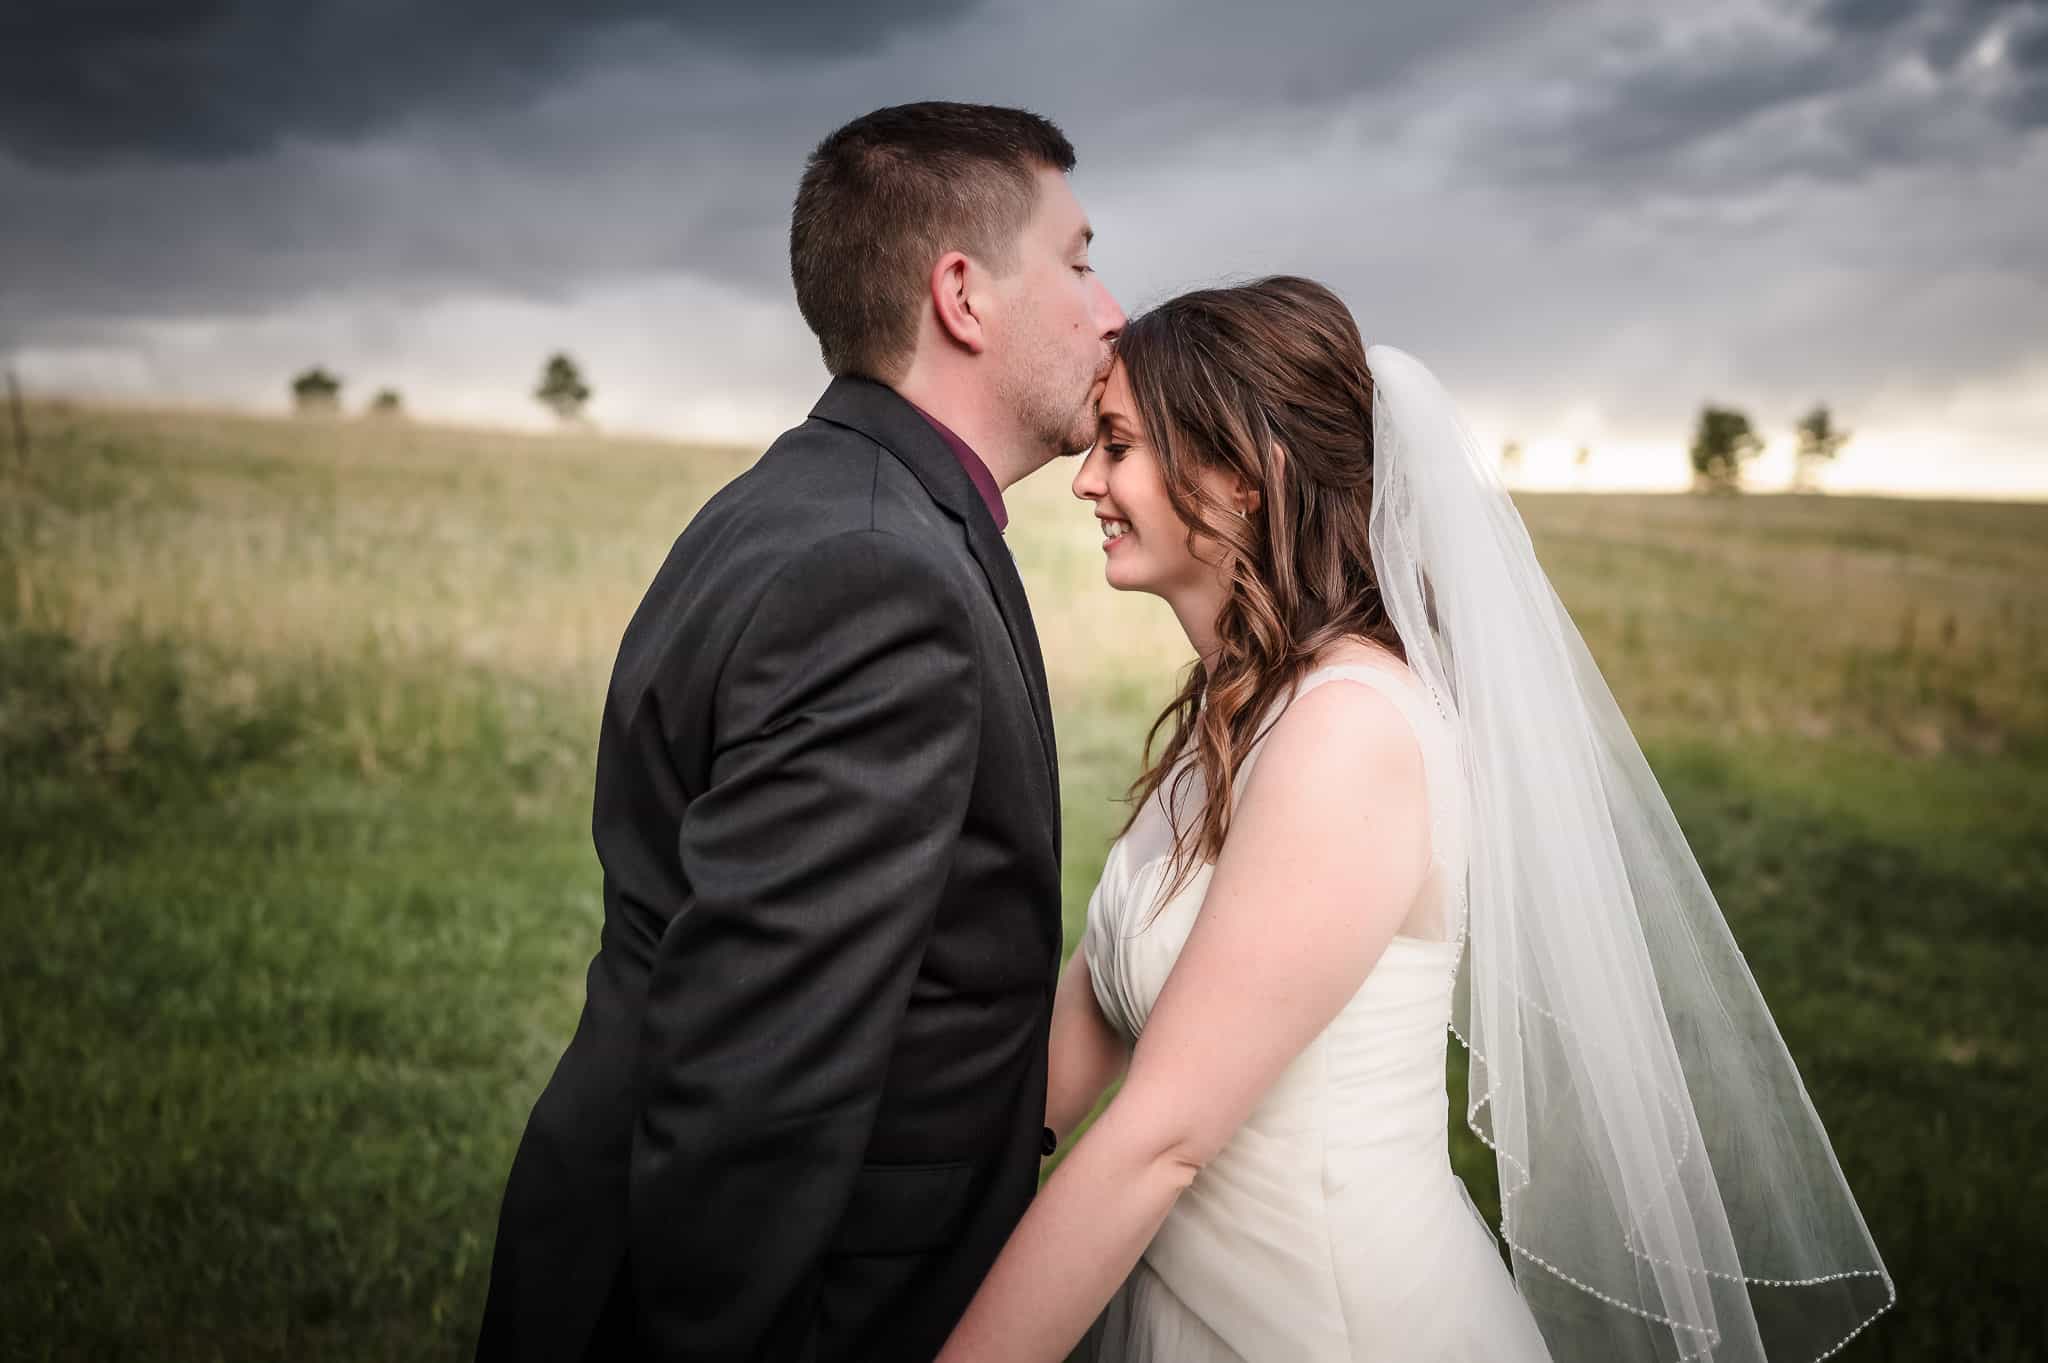 A groom kisses his bride on the forehead as the rain clouds start coming in over the prairie grass in Monument, Colorado just outside of Colorado Springs.